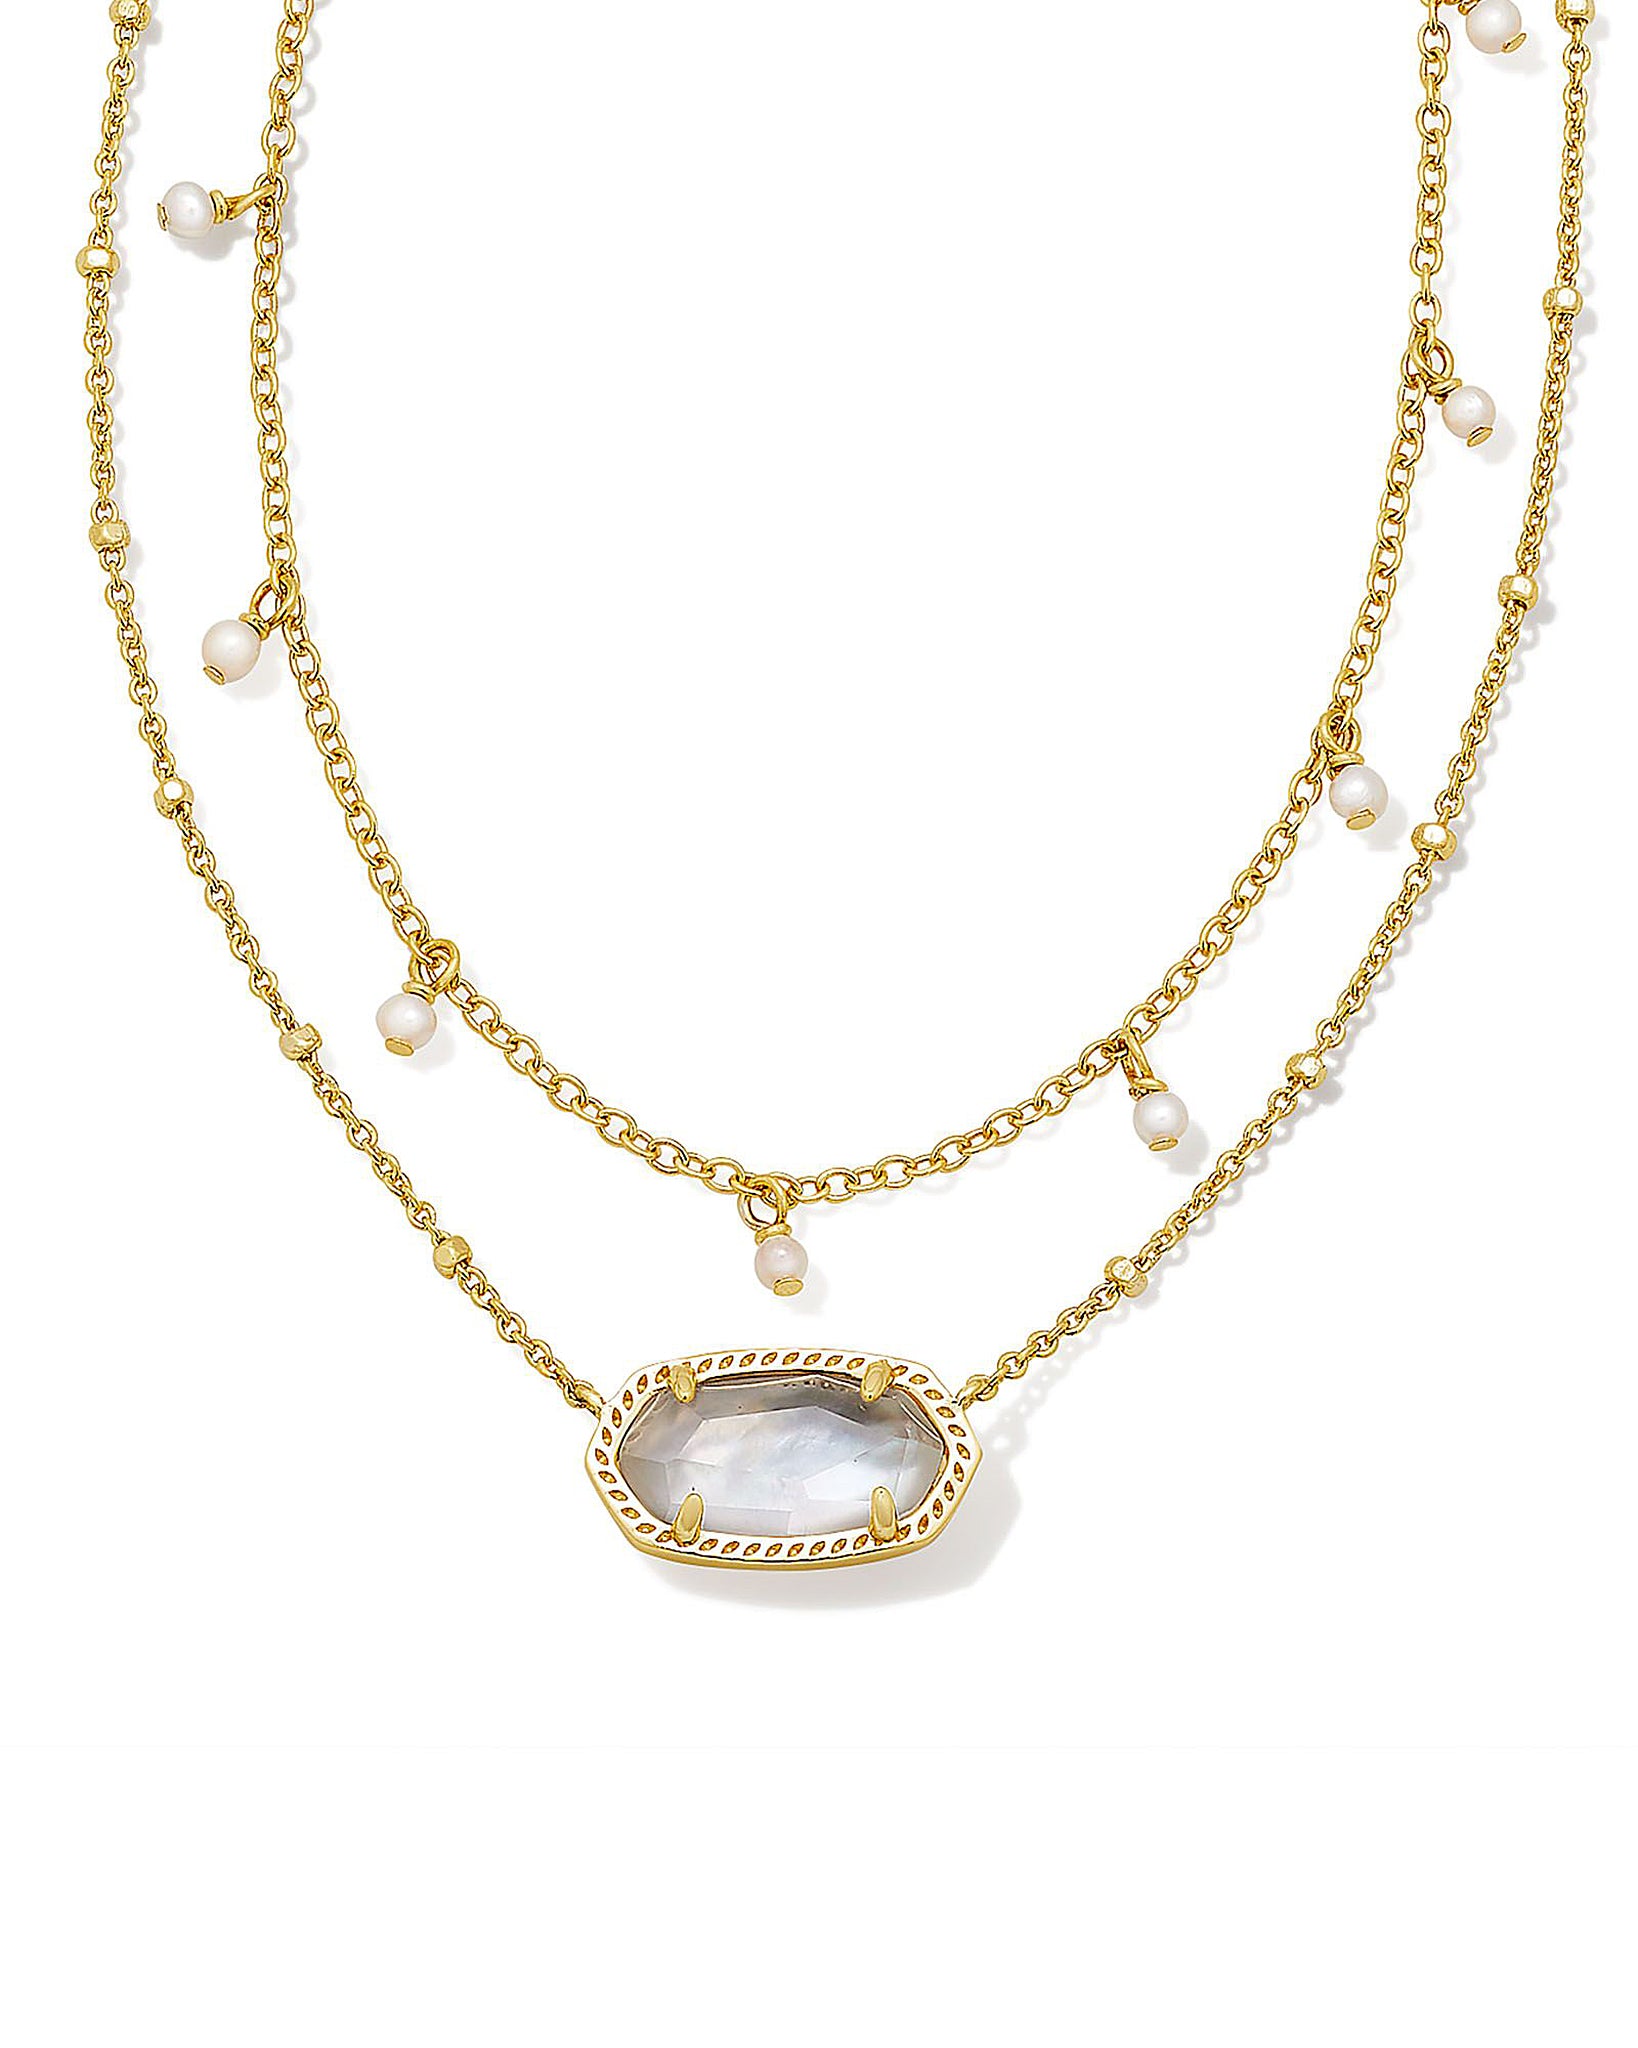 Kendra Scott Elisa Multi Strand Pearl Necklace in Ivory Mother of Pearl and Gold